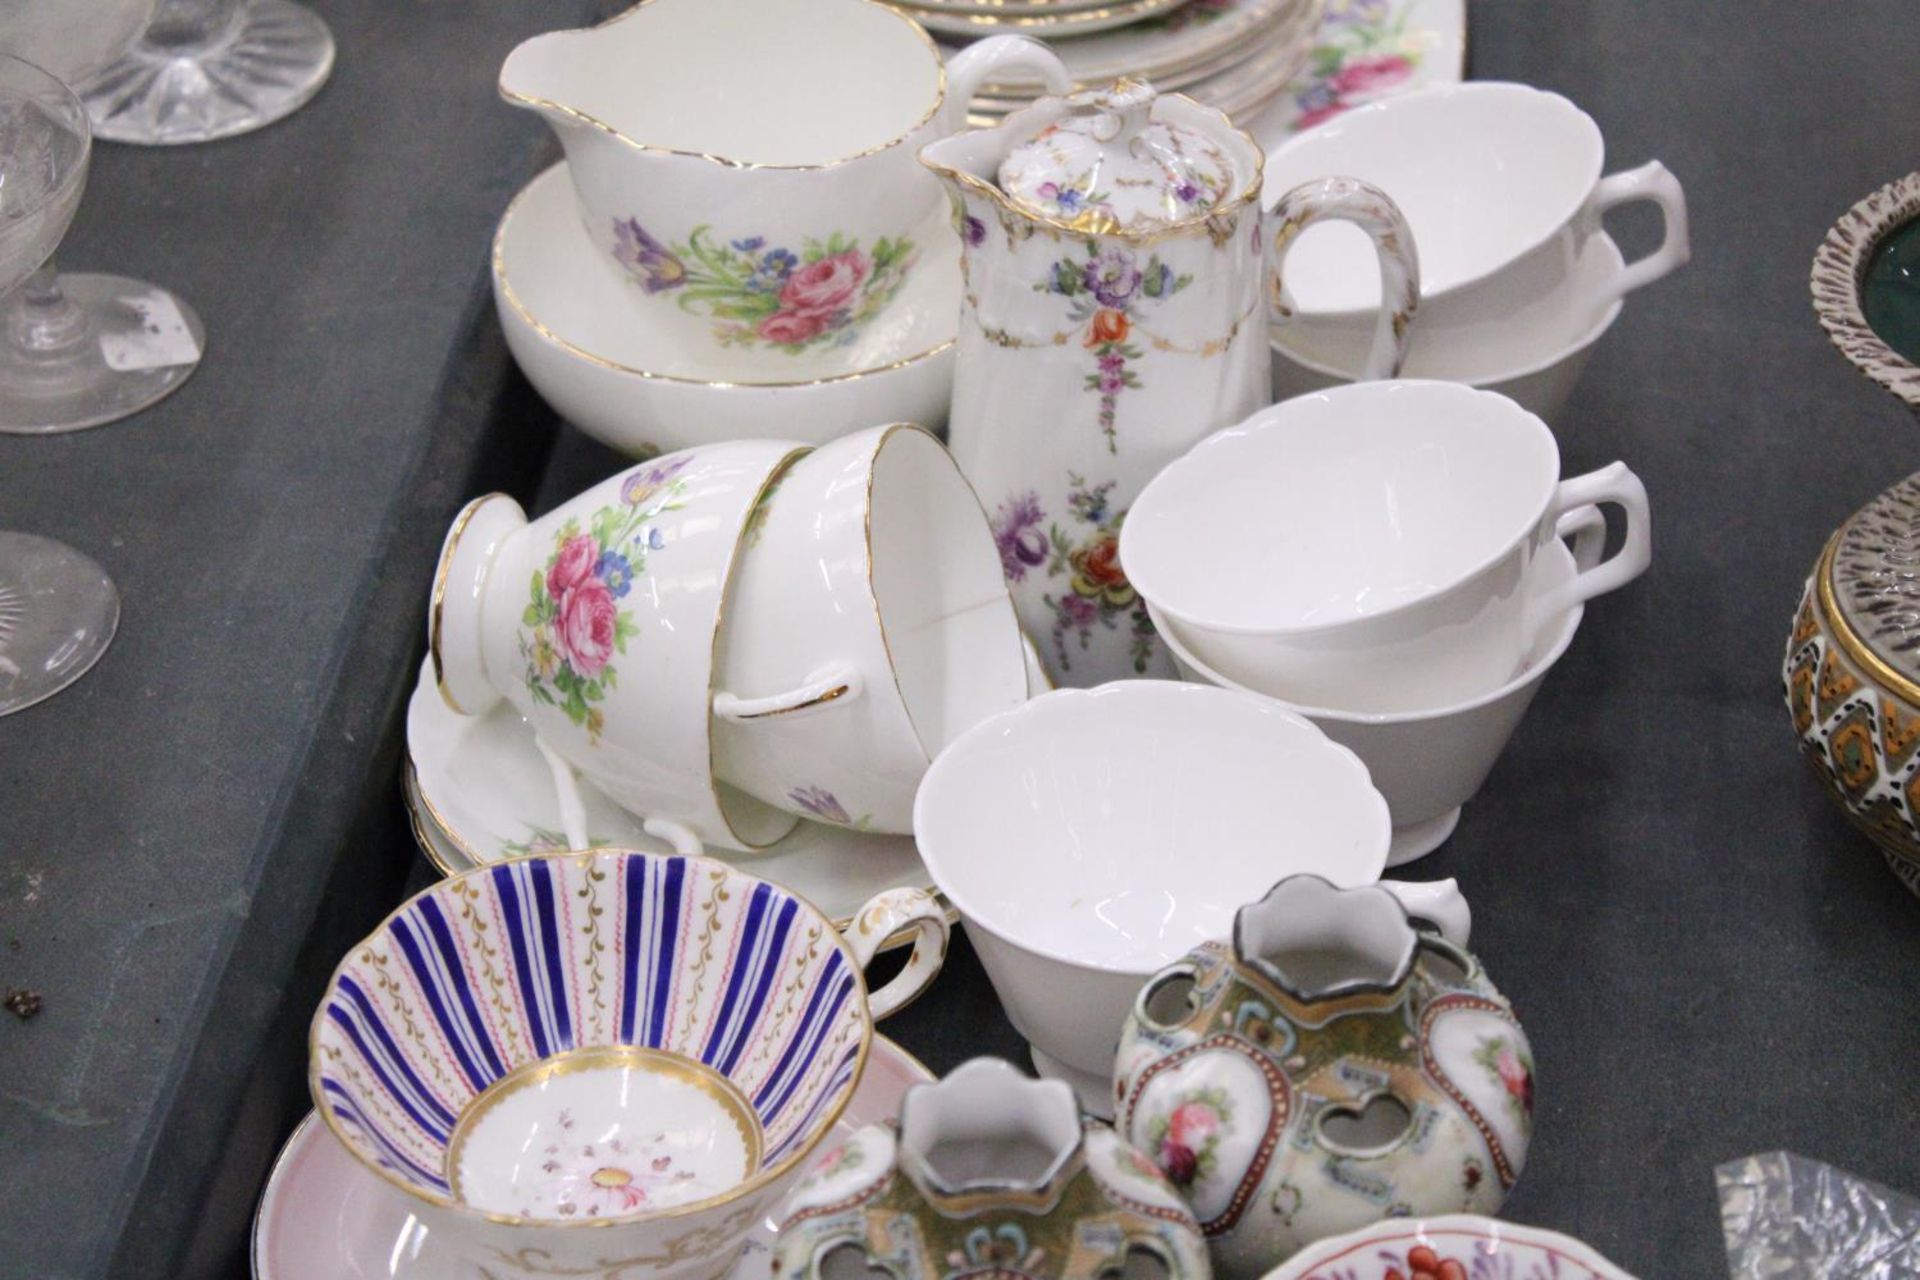 A FOLEY CHINA PART TEASET TO INCLUDE A CAKE PLATE, A CREAM JUG, SUGAR BOWL, CUPS, SAUCERS AND SIDE - Bild 4 aus 6